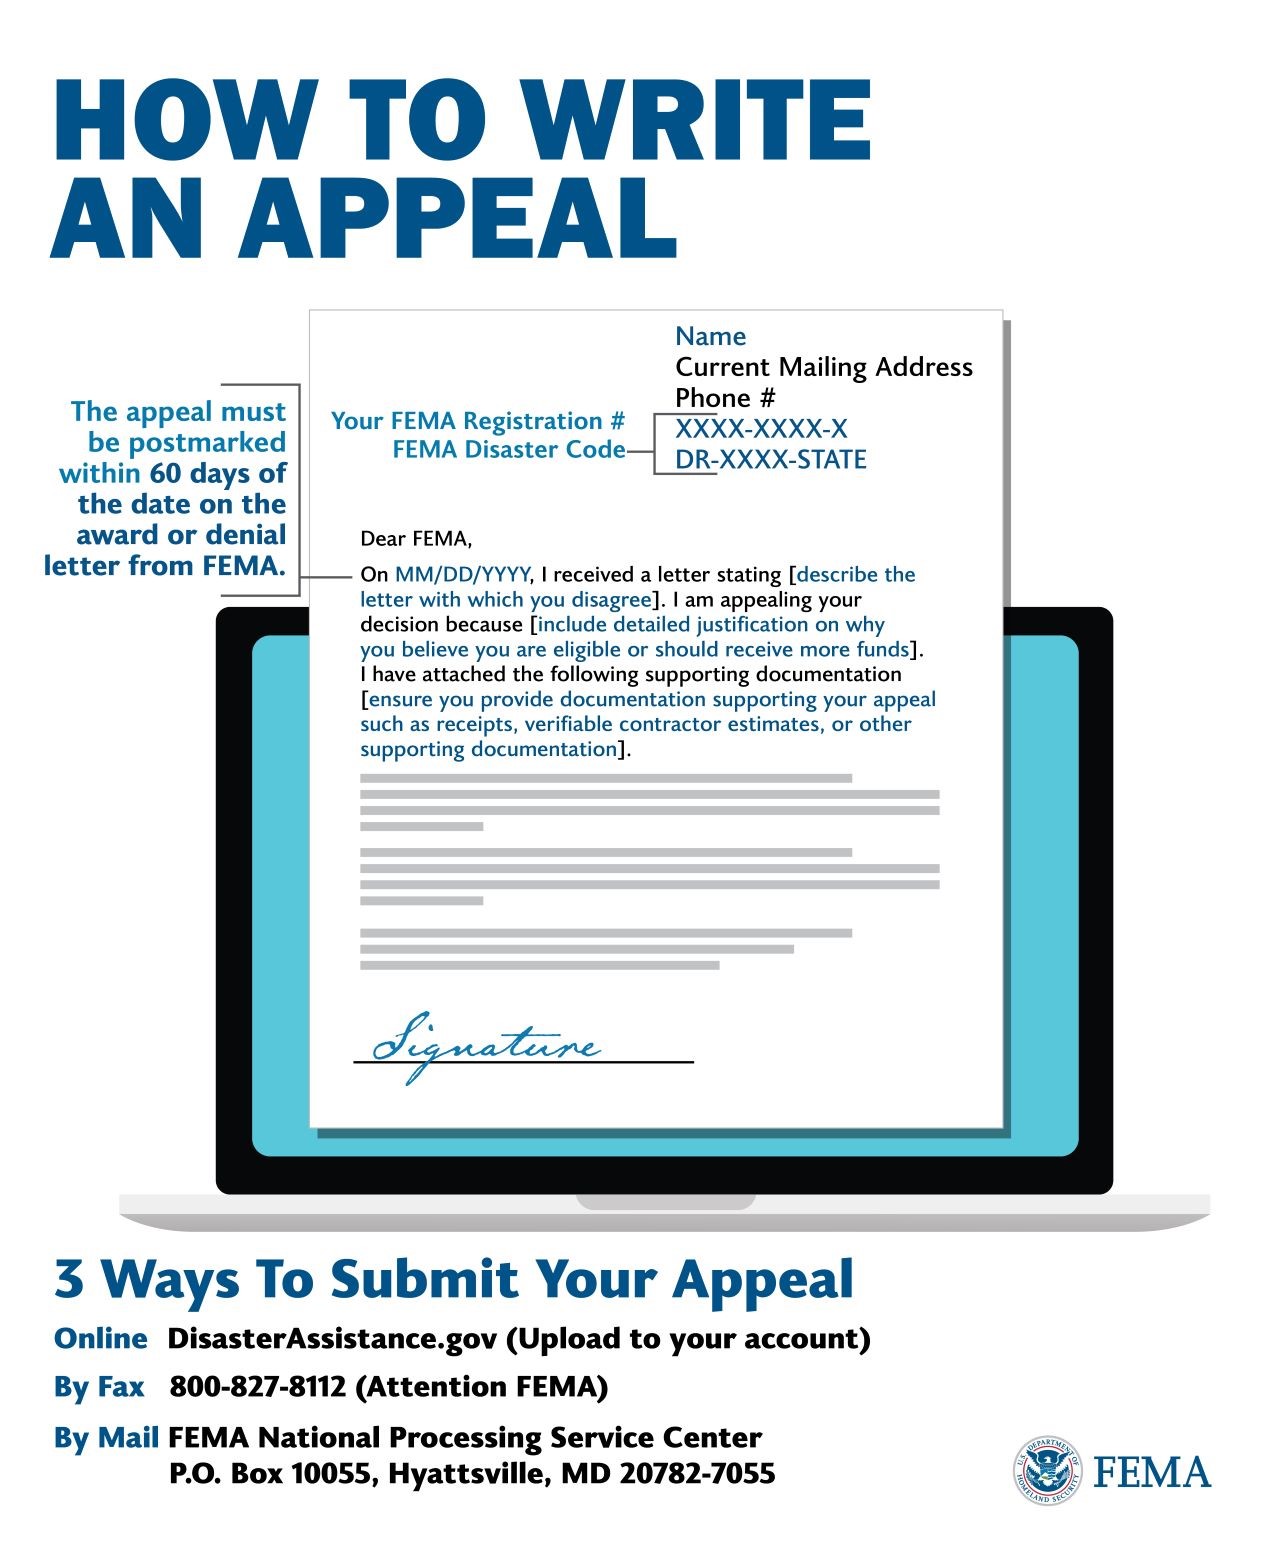 how-to-appeal-fema-phaserepeat9